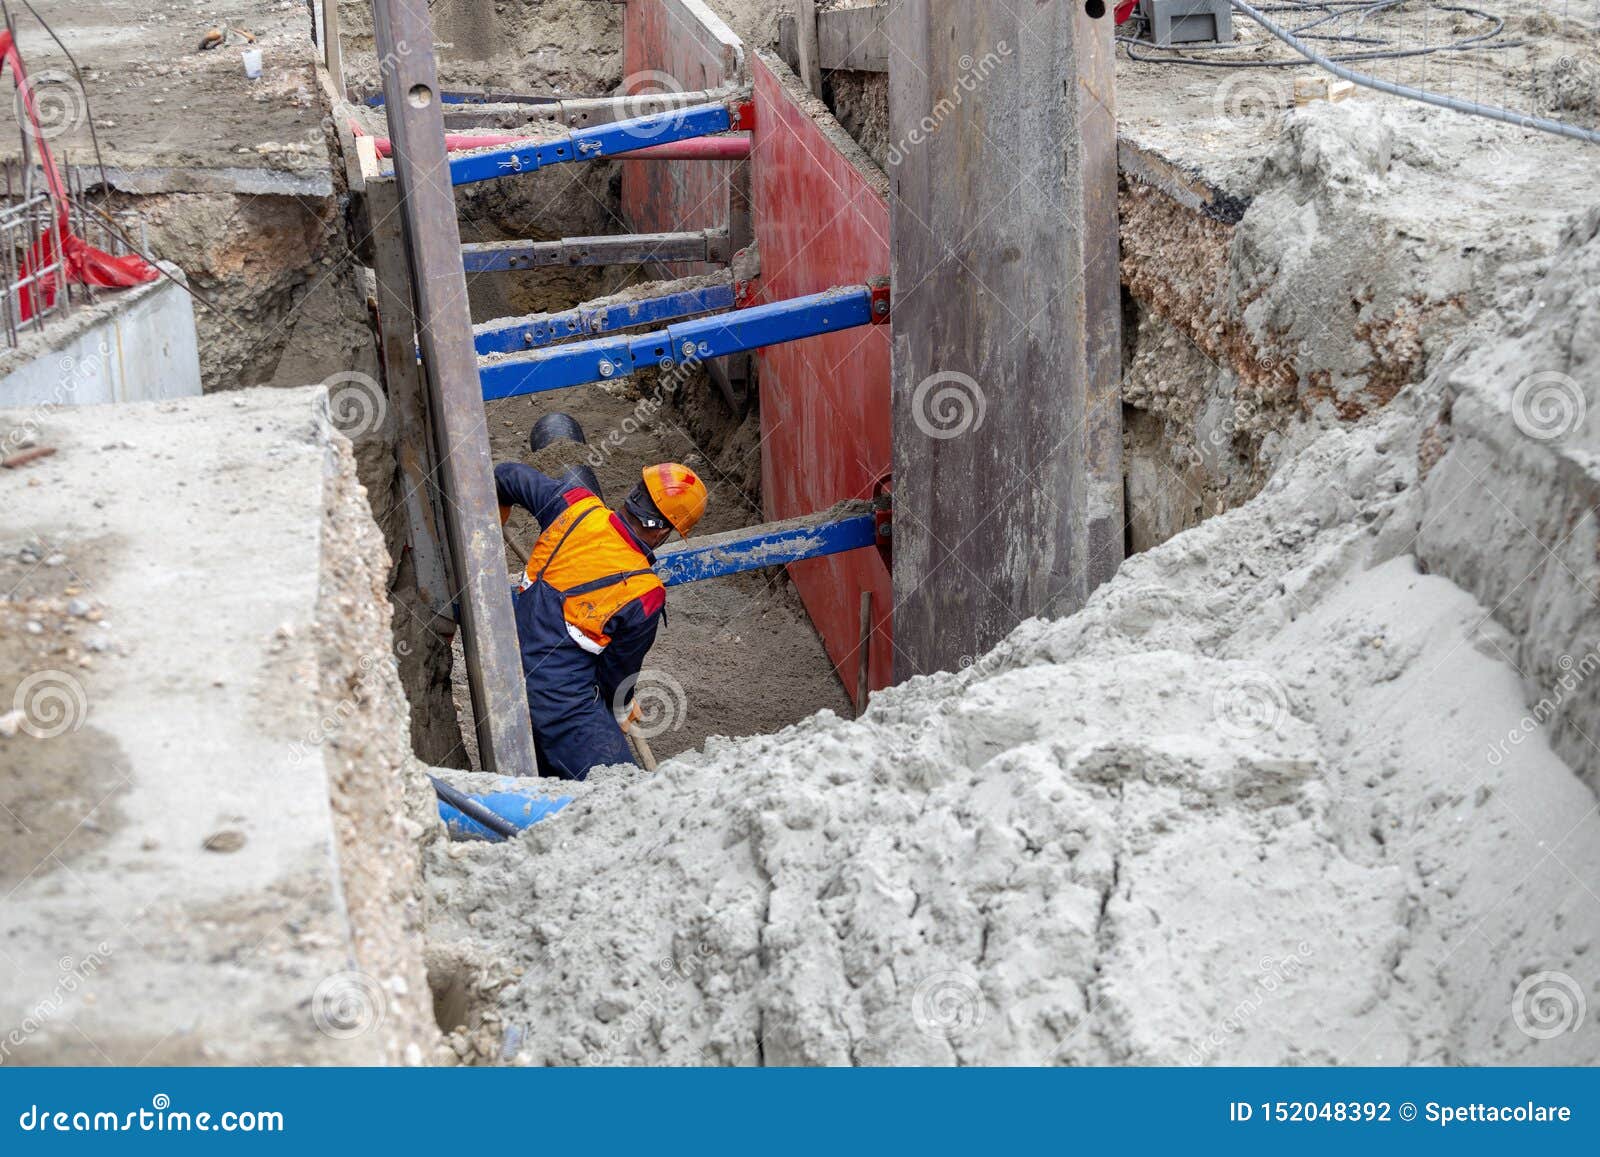 worker making trench bed for new pipeline construction